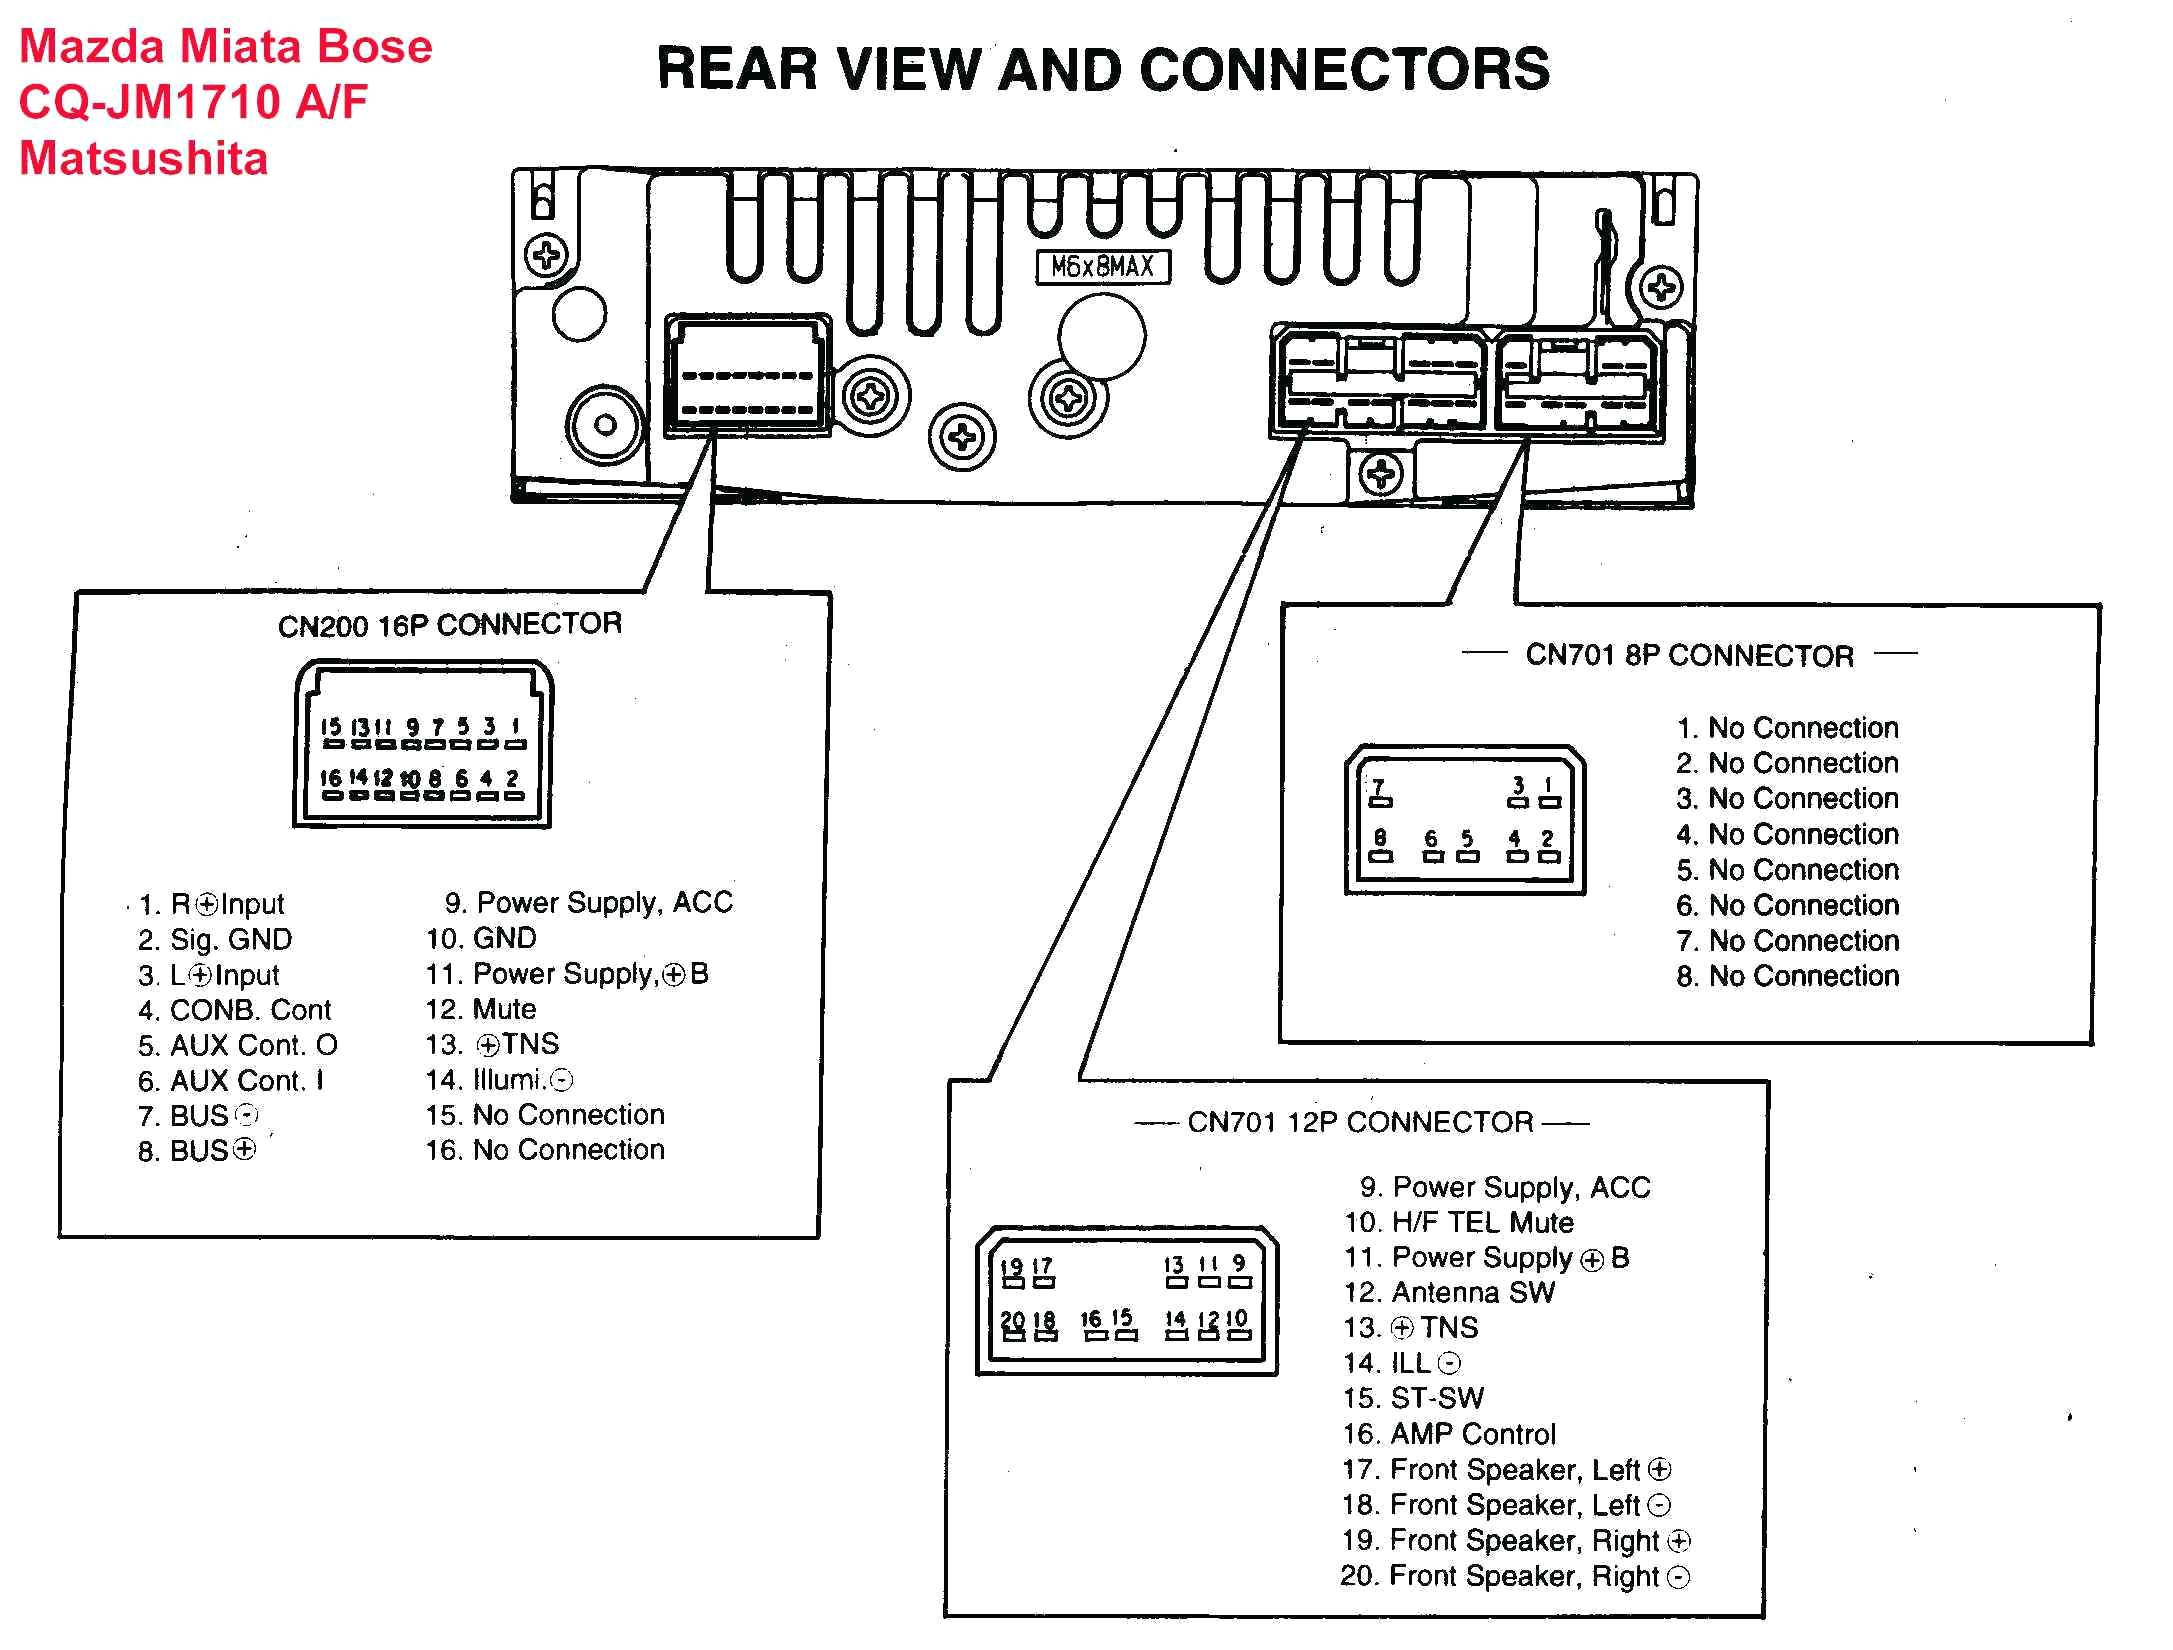 pioneer car stereo wiring harness diagram gm player wire aftermarket within panasonic diagrams for pioneer wiring harness diagram jpg